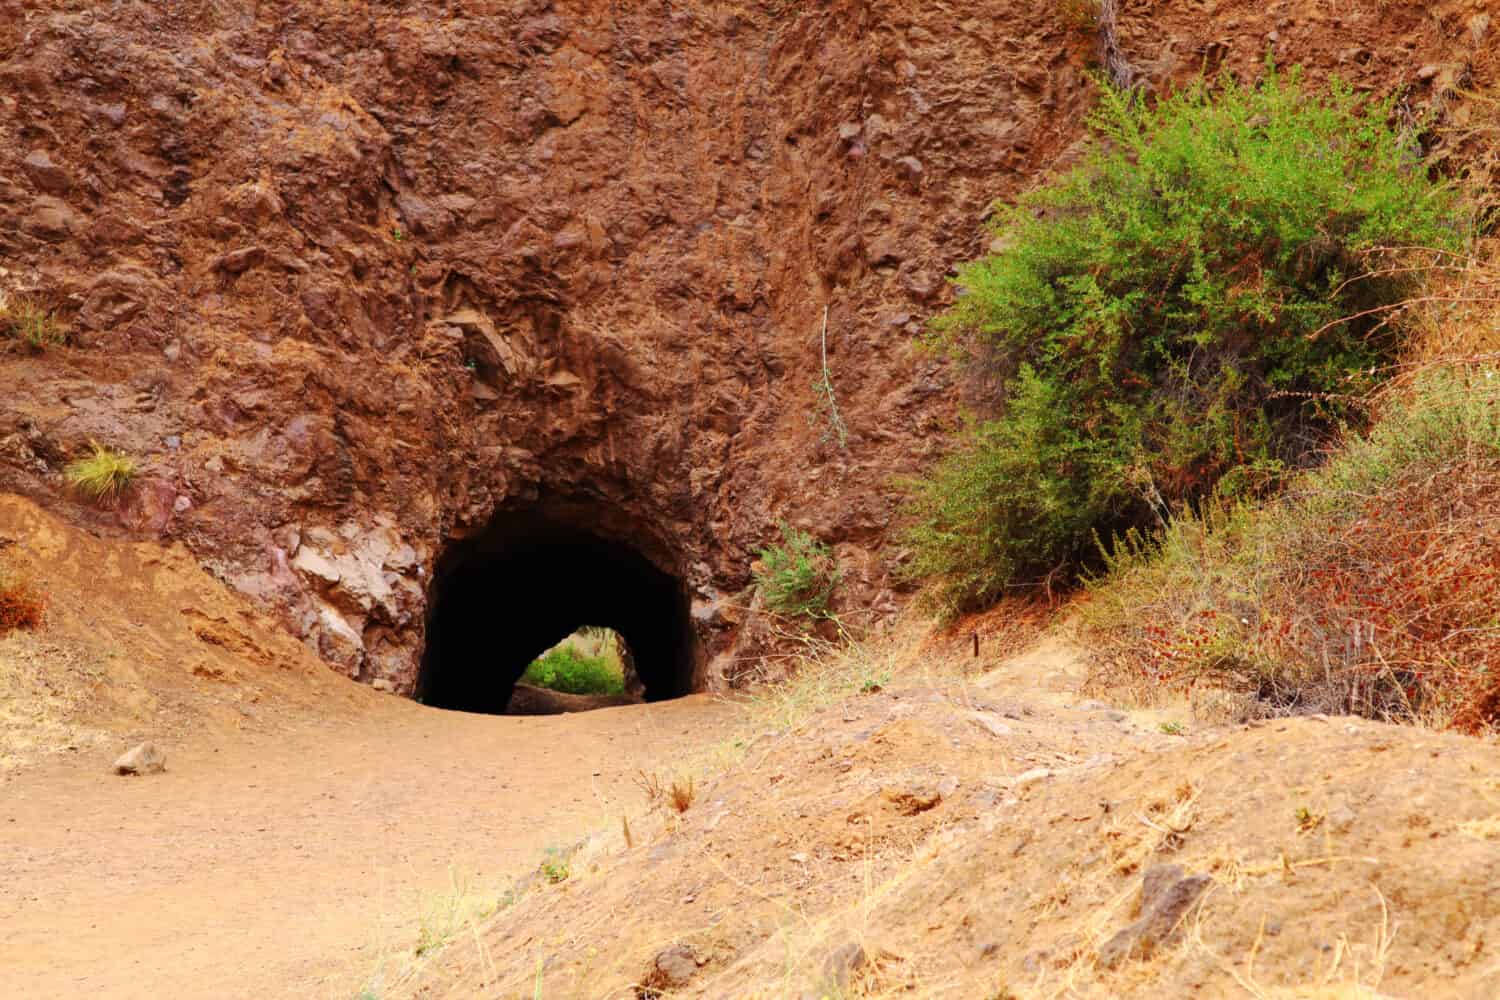 <p>The Bronson Caves not only give a majestic view of the monument, but they are also the home of the iconic Batcave from the <a href="https://www.californiacuriosities.com/bronson-canyon-bat-cave/" rel="noopener">_Batman_ show in the sixties.</a> It is also home to scenes from films like _Army Of Darkness_ and _The Searchers_. It is a relatively short hike compared to the other trails on the list, clocking in under an hour, but it is an effective trail to get some amazing shots of the sign itself. To access the caves, park at the parking lot at the end of Brush Canyon and you'll reach a gate by Camp Hollywoodland. After that gate, keep going north through the Brush Canyon and you'll be there in no time.</p>